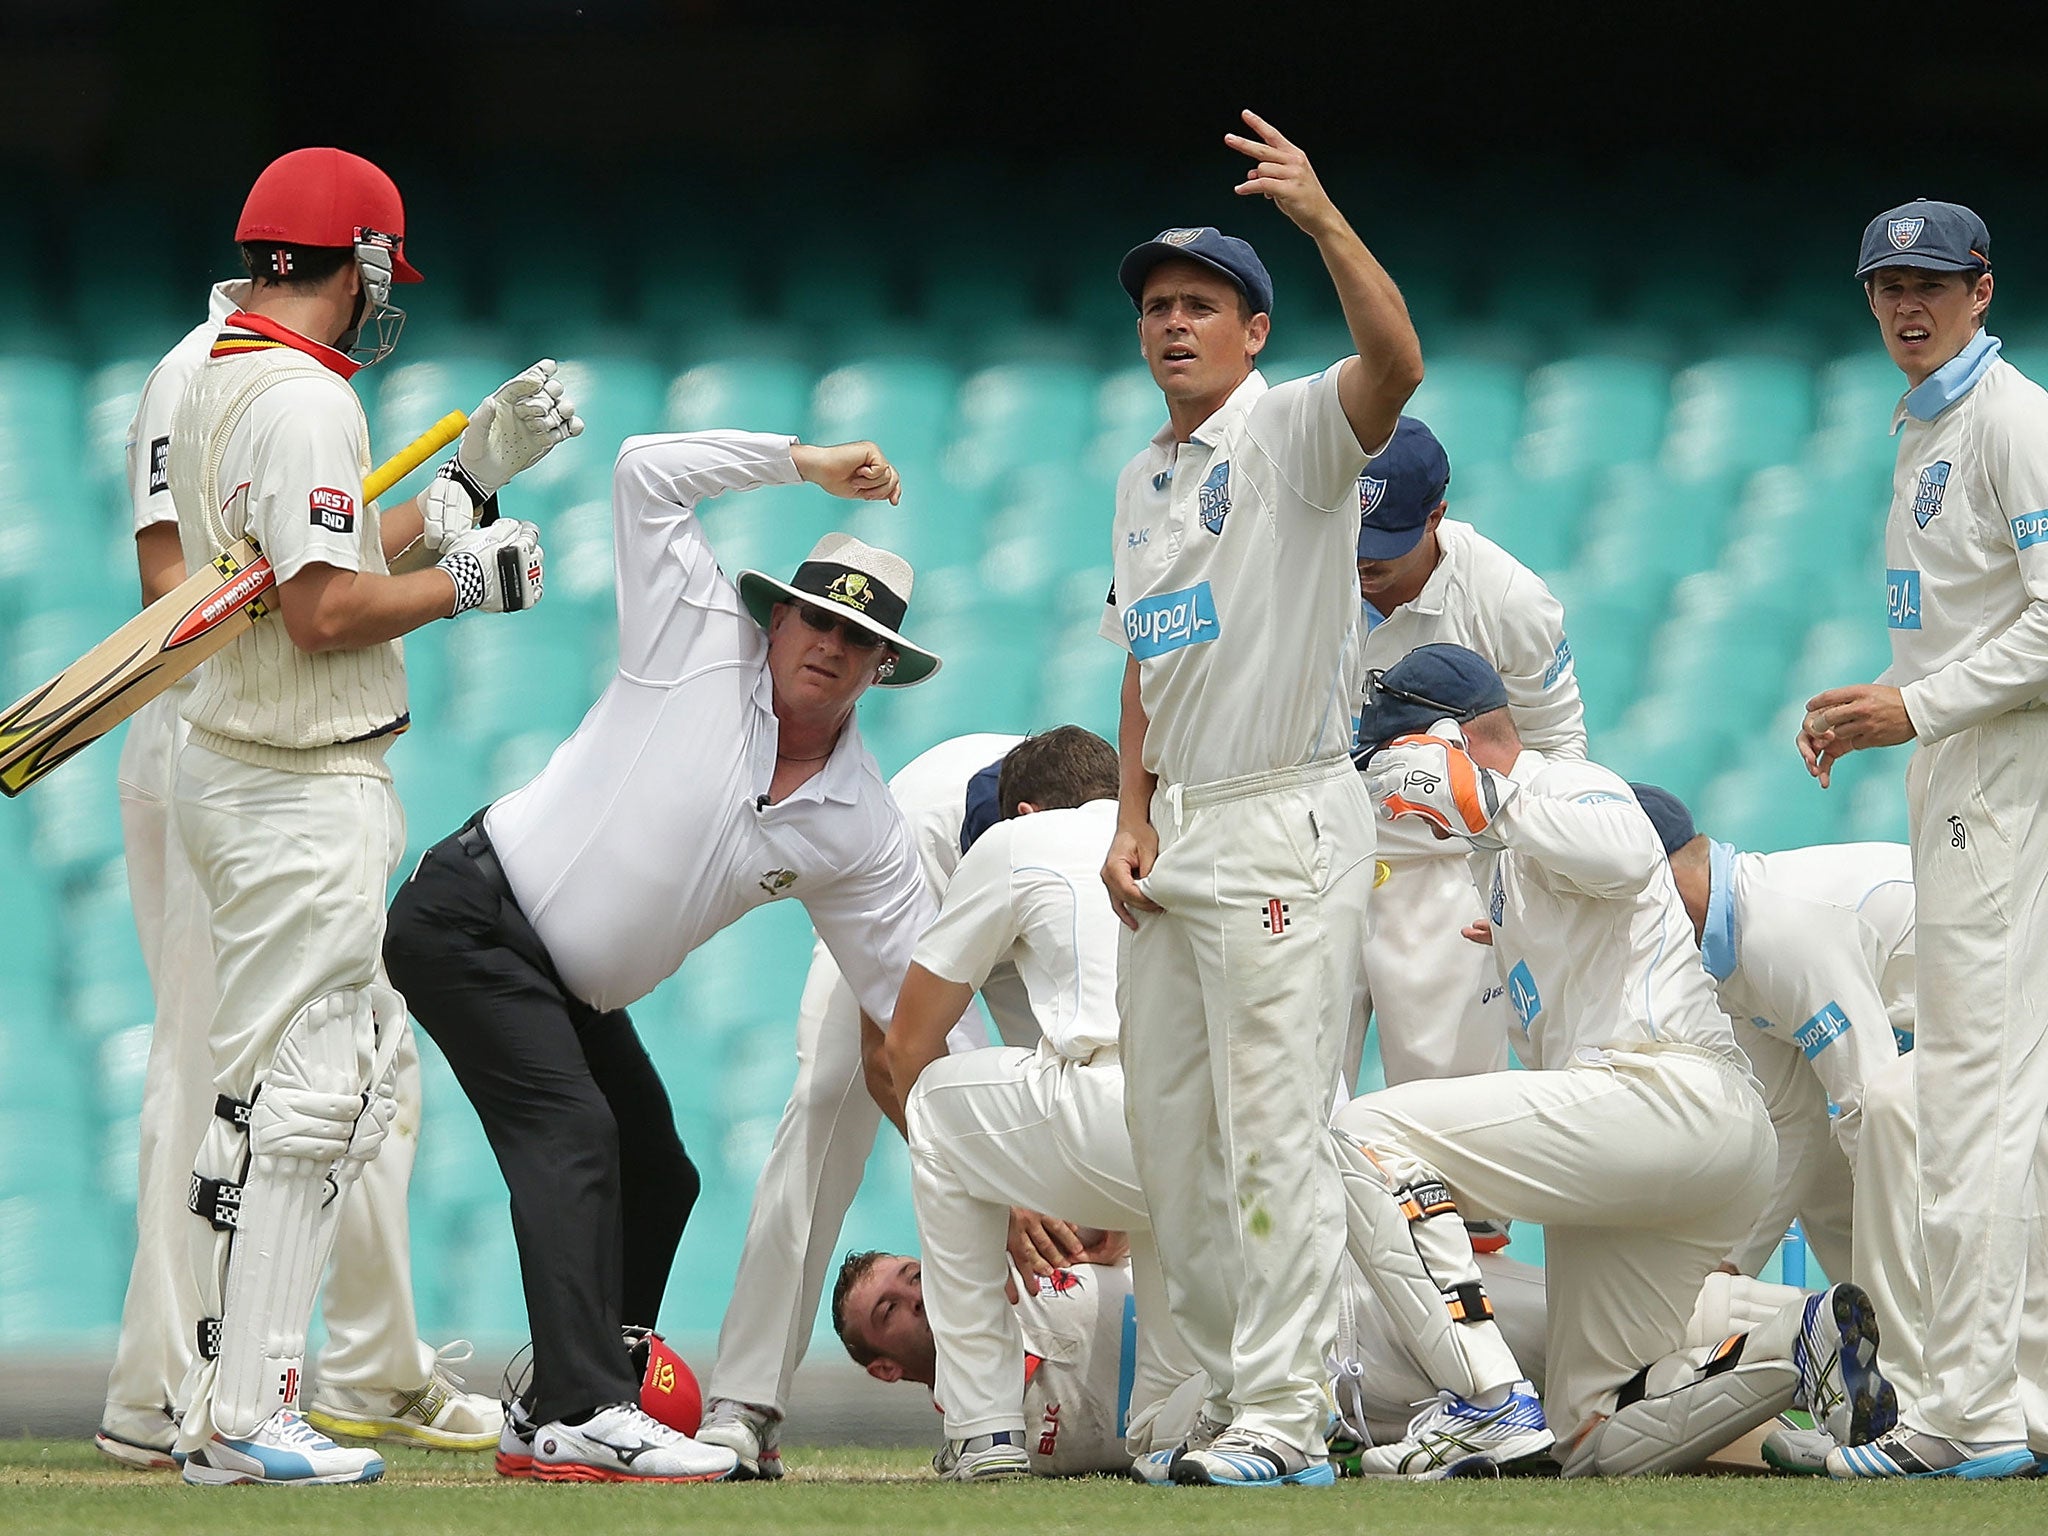 Players call for medical help after Hughes collapses